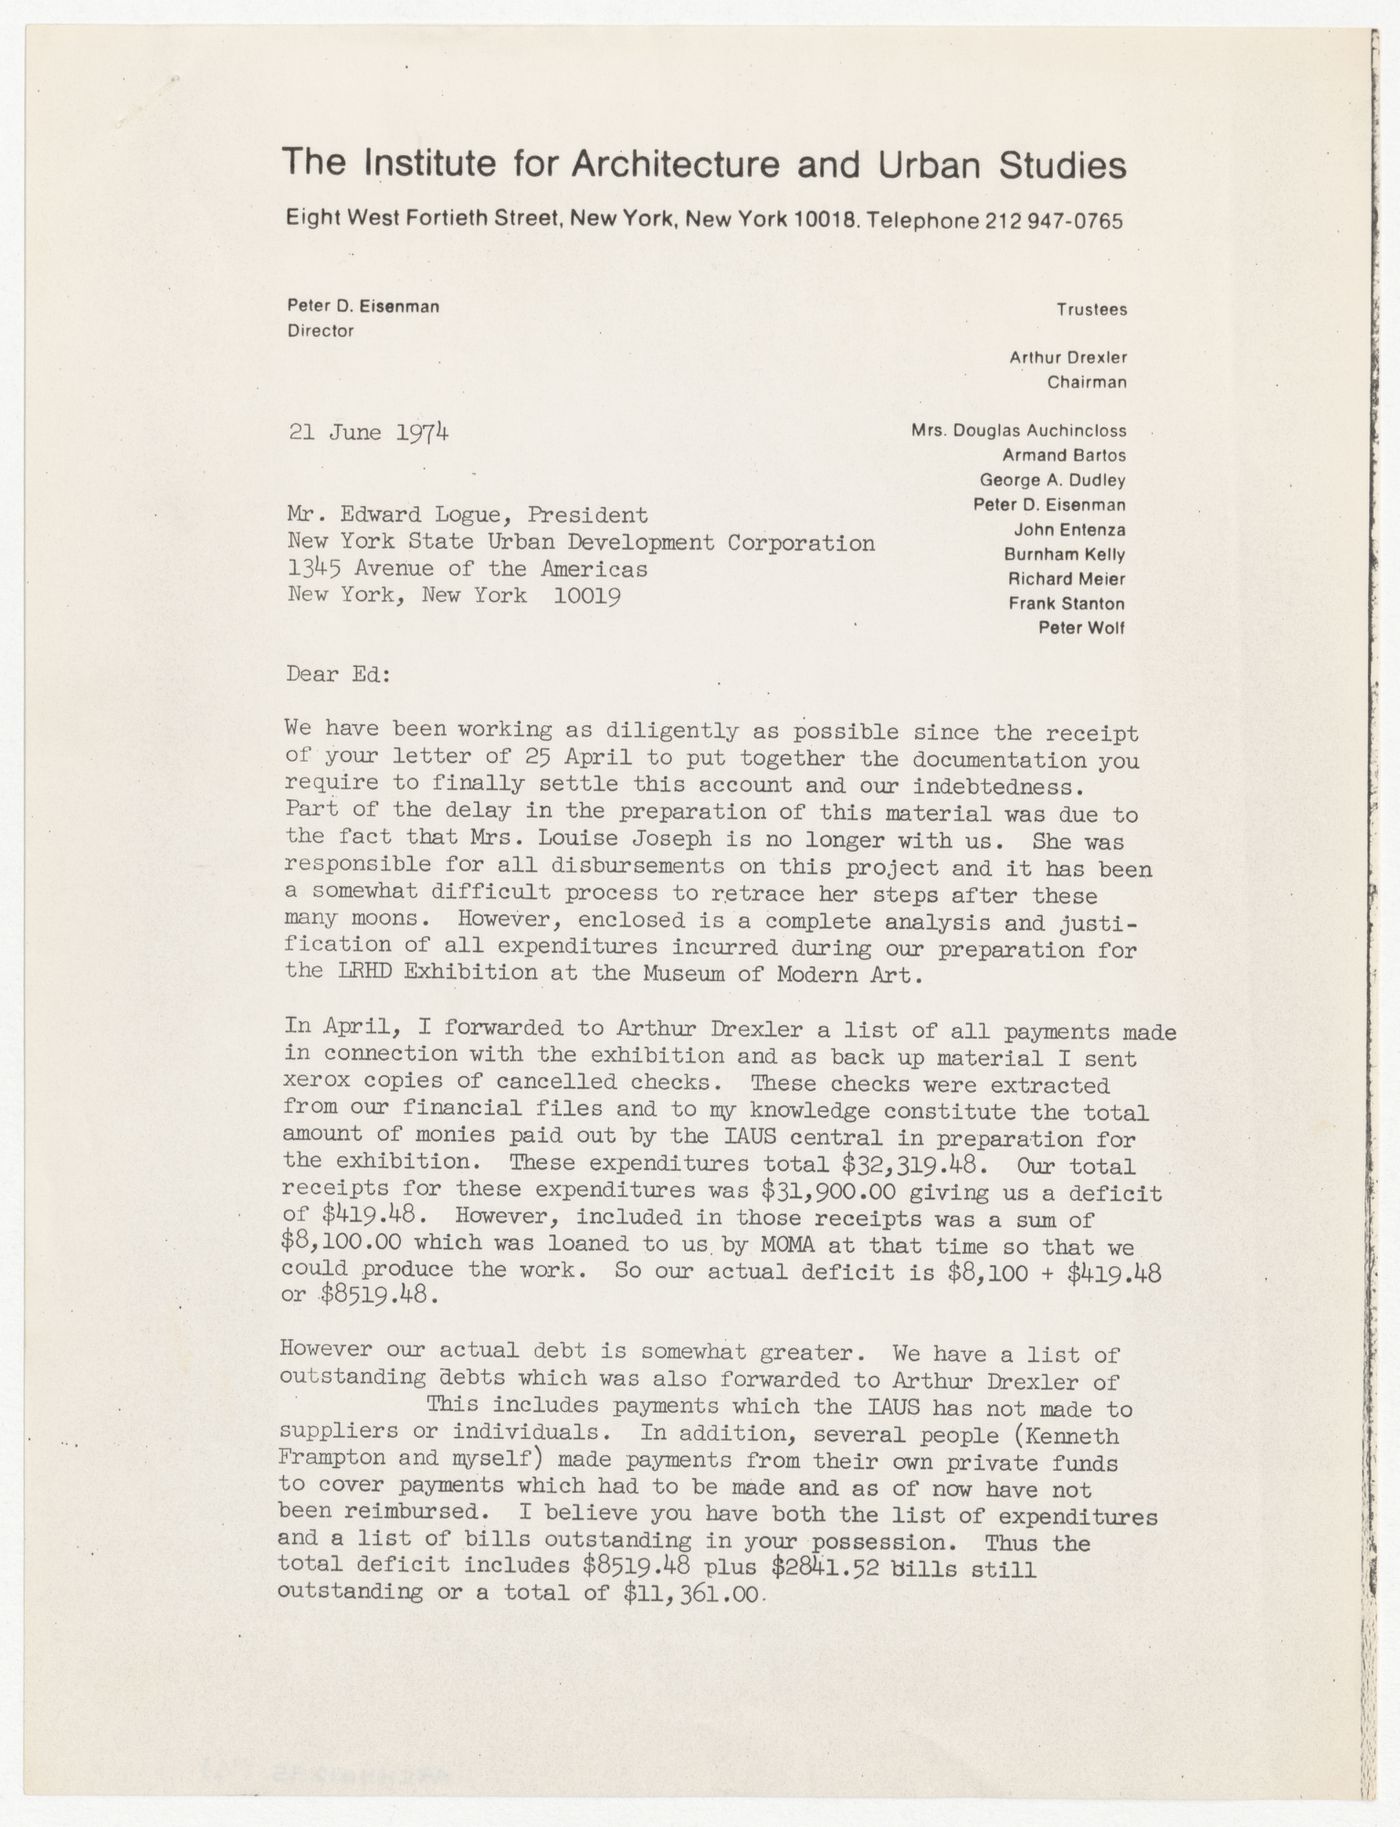 Letter from Peter D. Eisenman to Edward J. Logue about Low-Rise High-Density (LRHD) exhibition and catalog